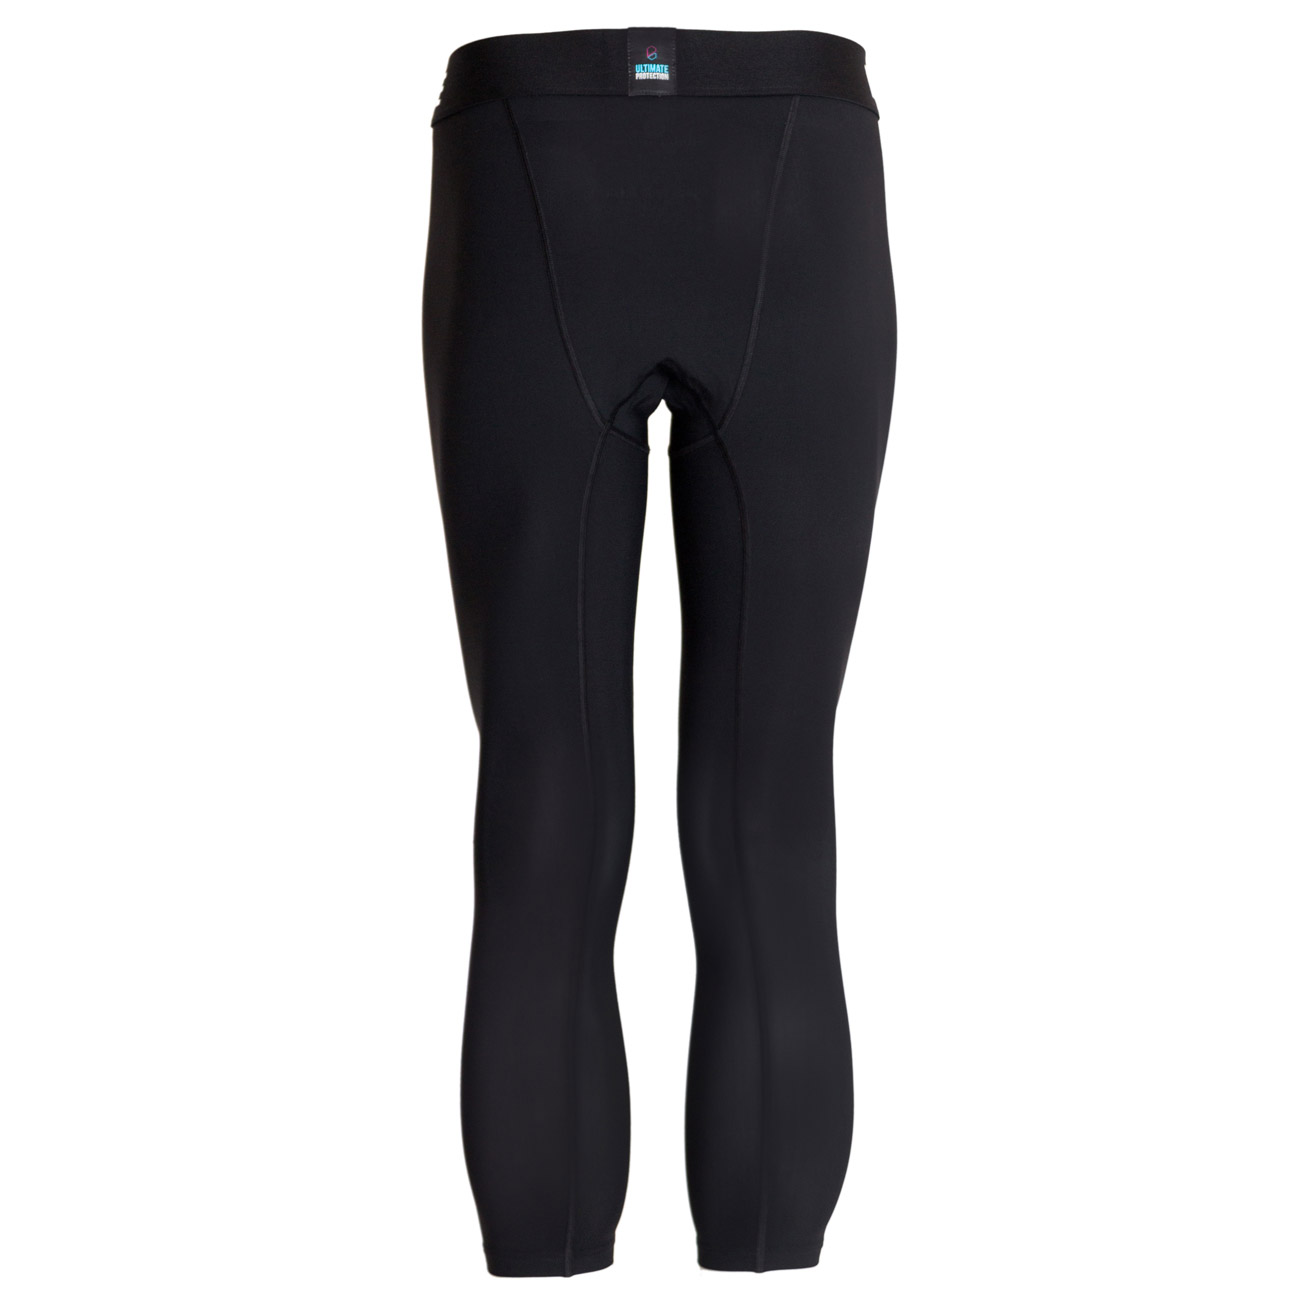 BLINDSAVE Protective 3/4 Tights with Knee Padding